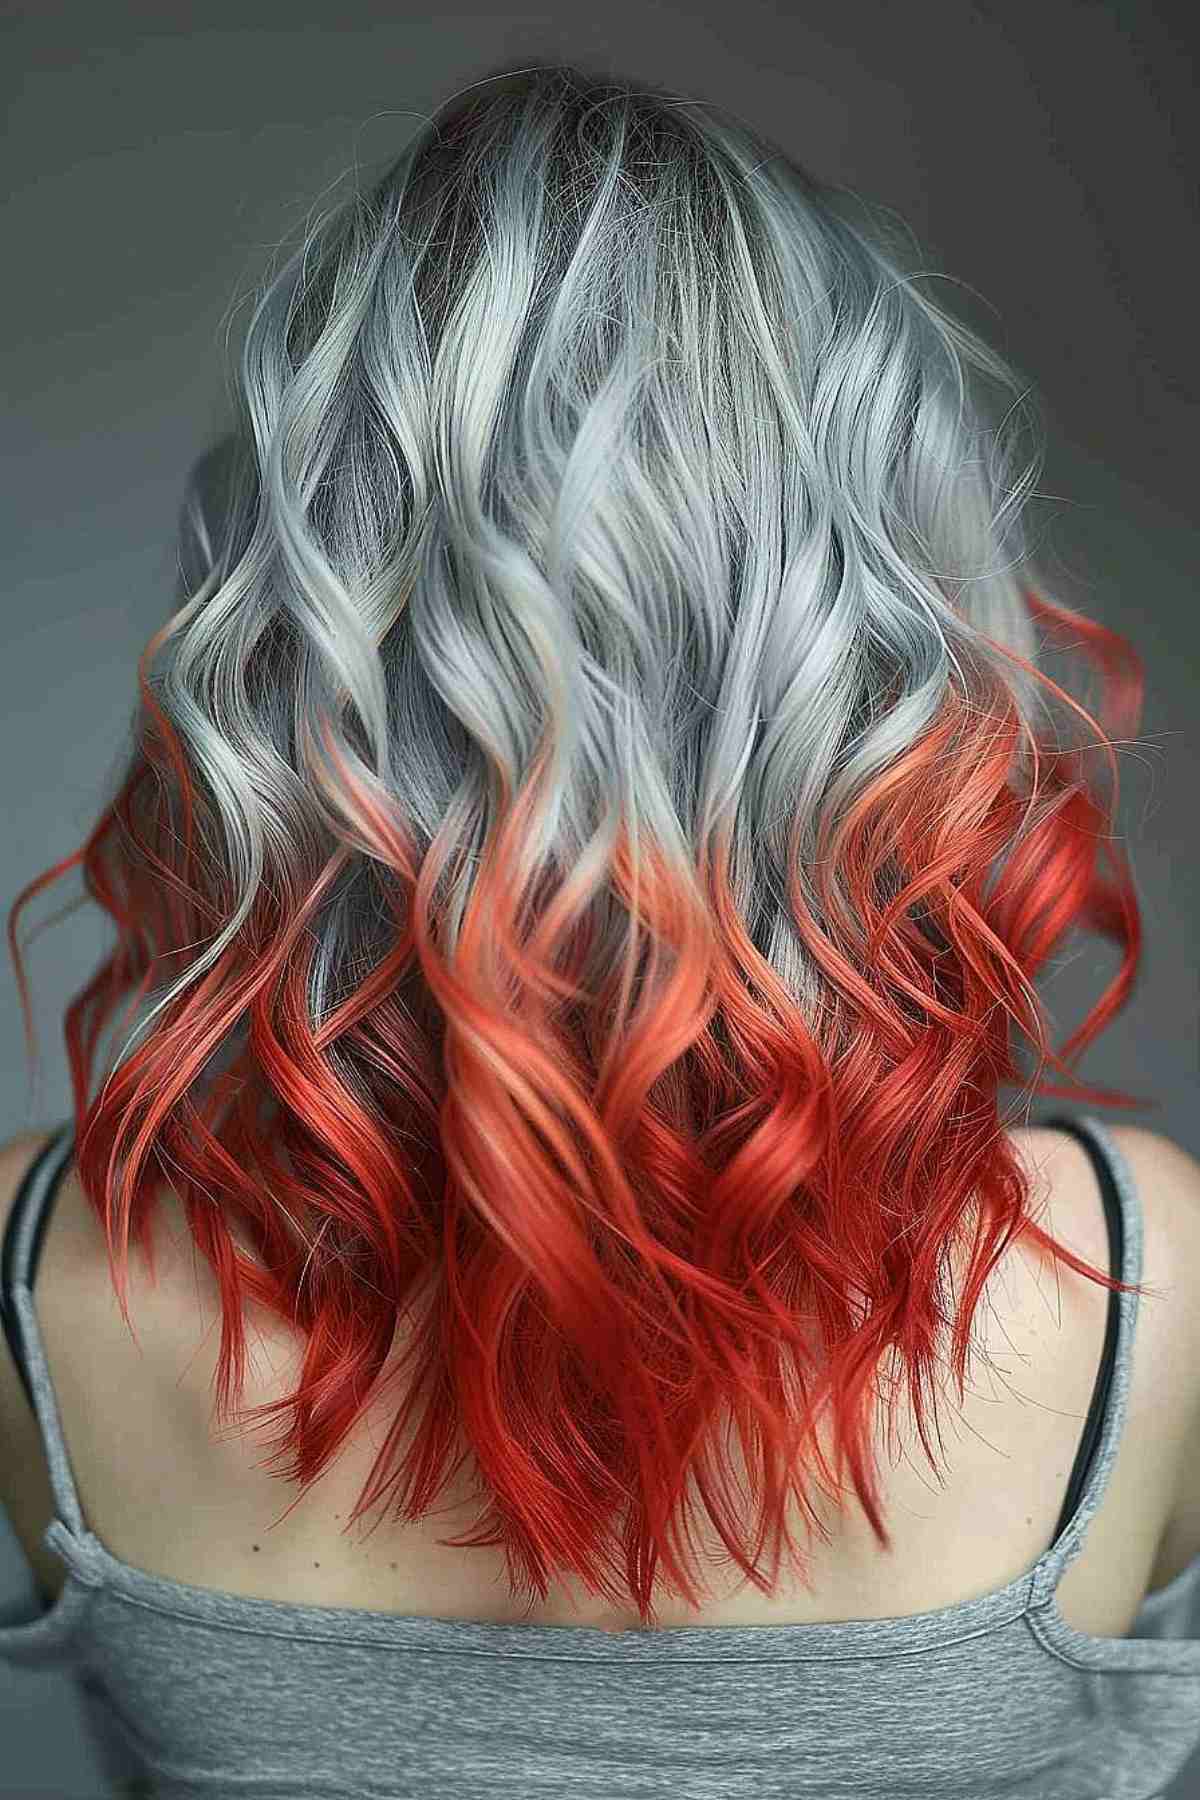 Medium-length wavy hair with a vivid silver to red ombre effect